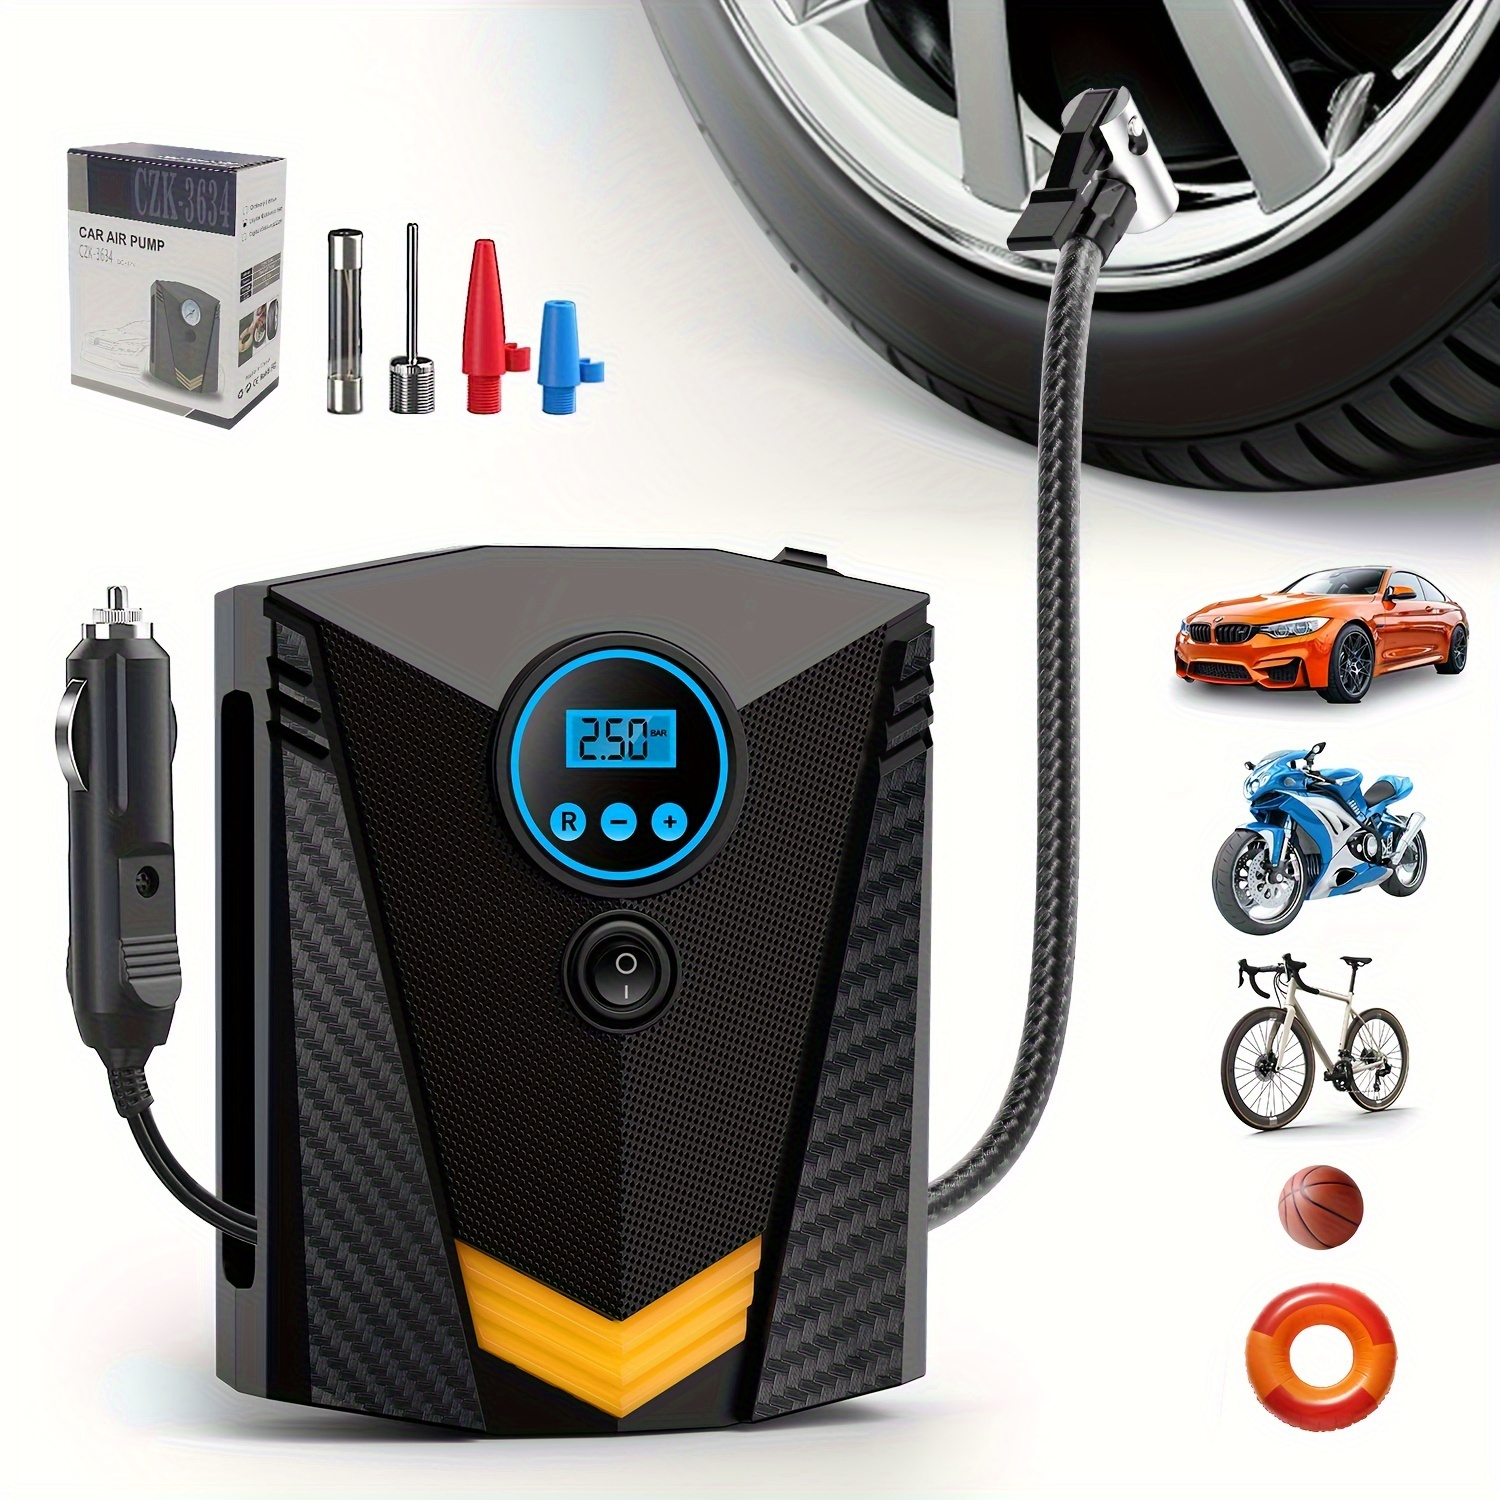 

Tire Inflator Air Compressor 12v Dc Portable Air Compressor Car Accessories Auto Tire Pump 100psi With Led Light Digital Air Pump For Car Tires Bicycles Other Inflatables